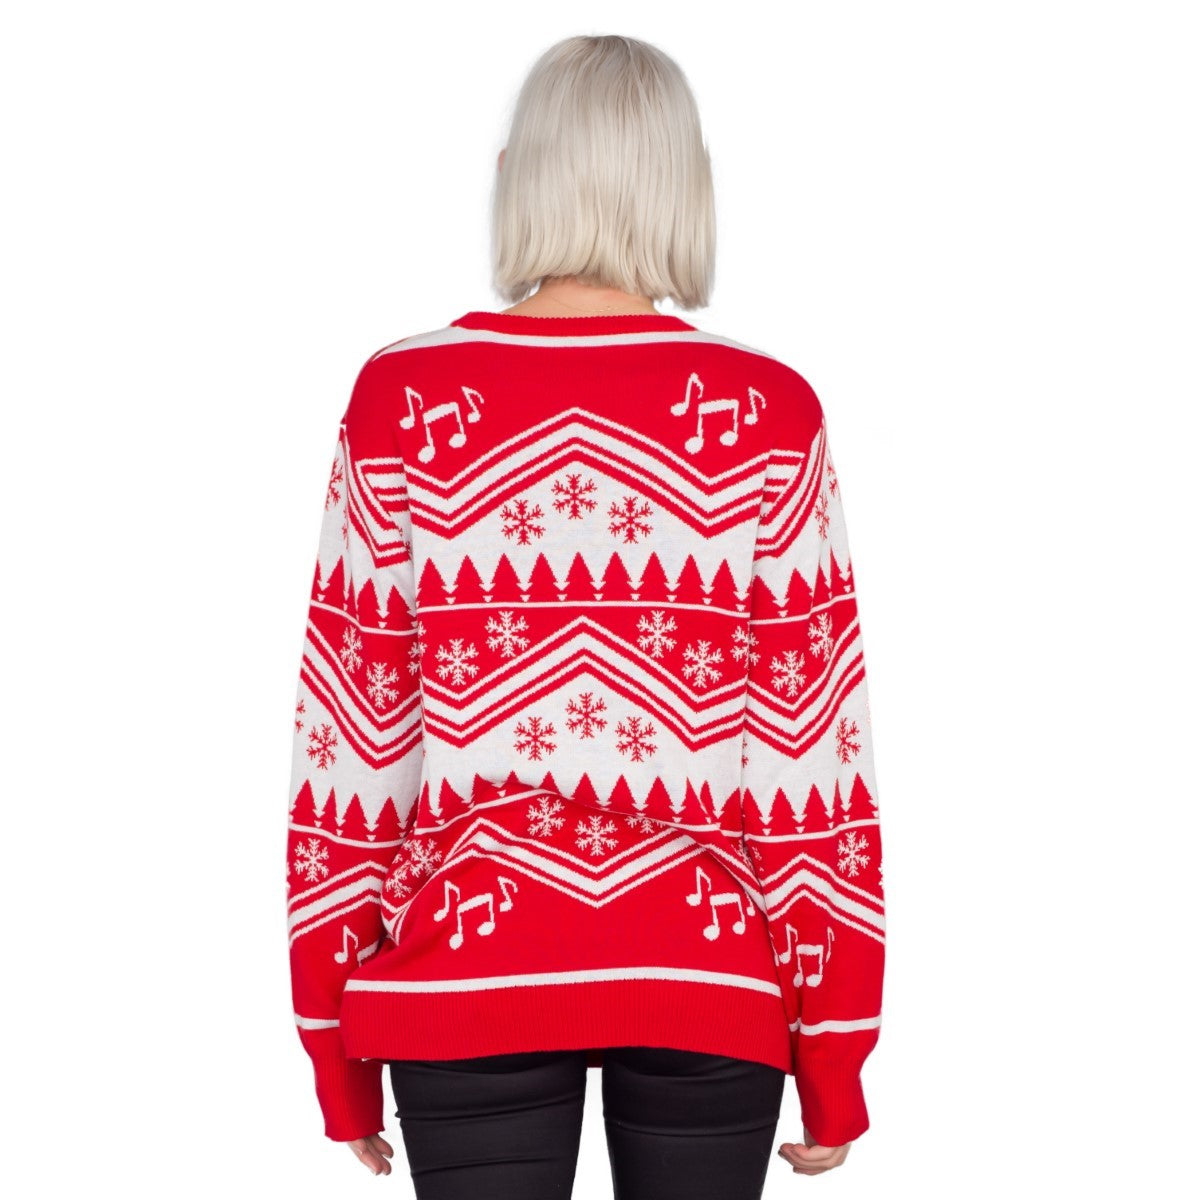 Women's Flappy Drummer Boy Animated Ugly Christmas Sweater 2